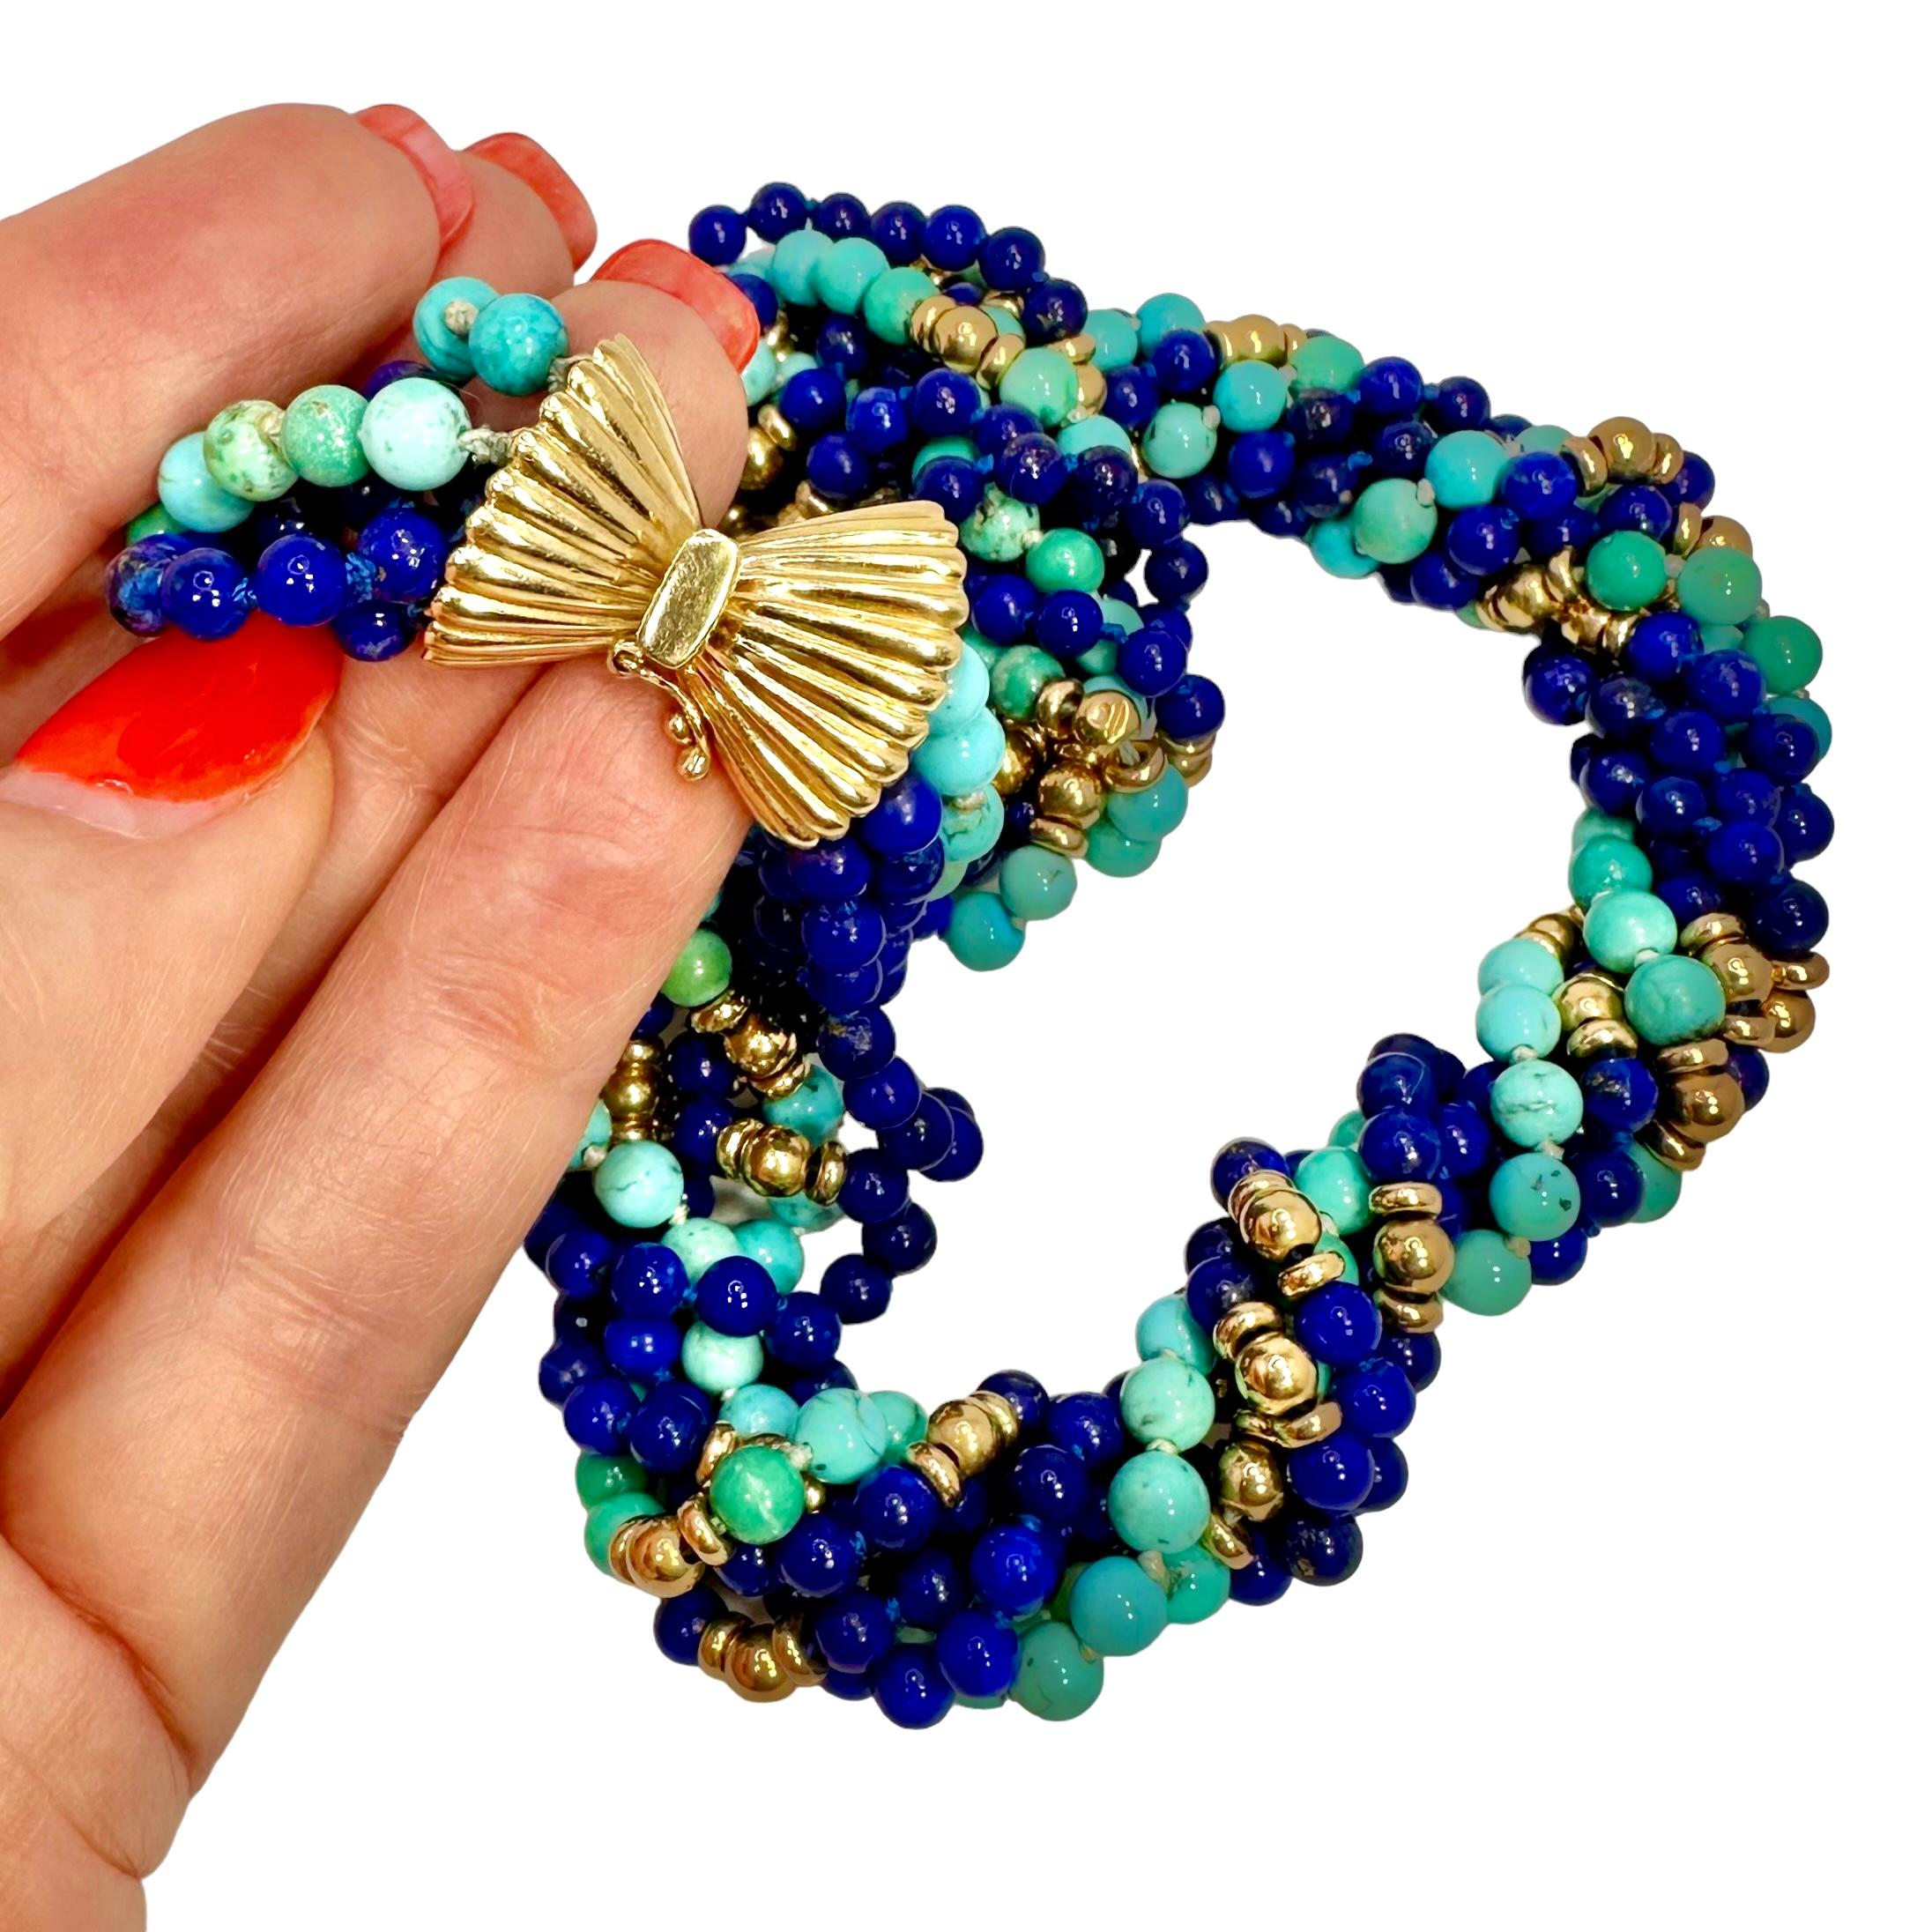 Classic Mid-20th Century Torsade Choker with Lapis, Turquoise and Gold Beads For Sale 2